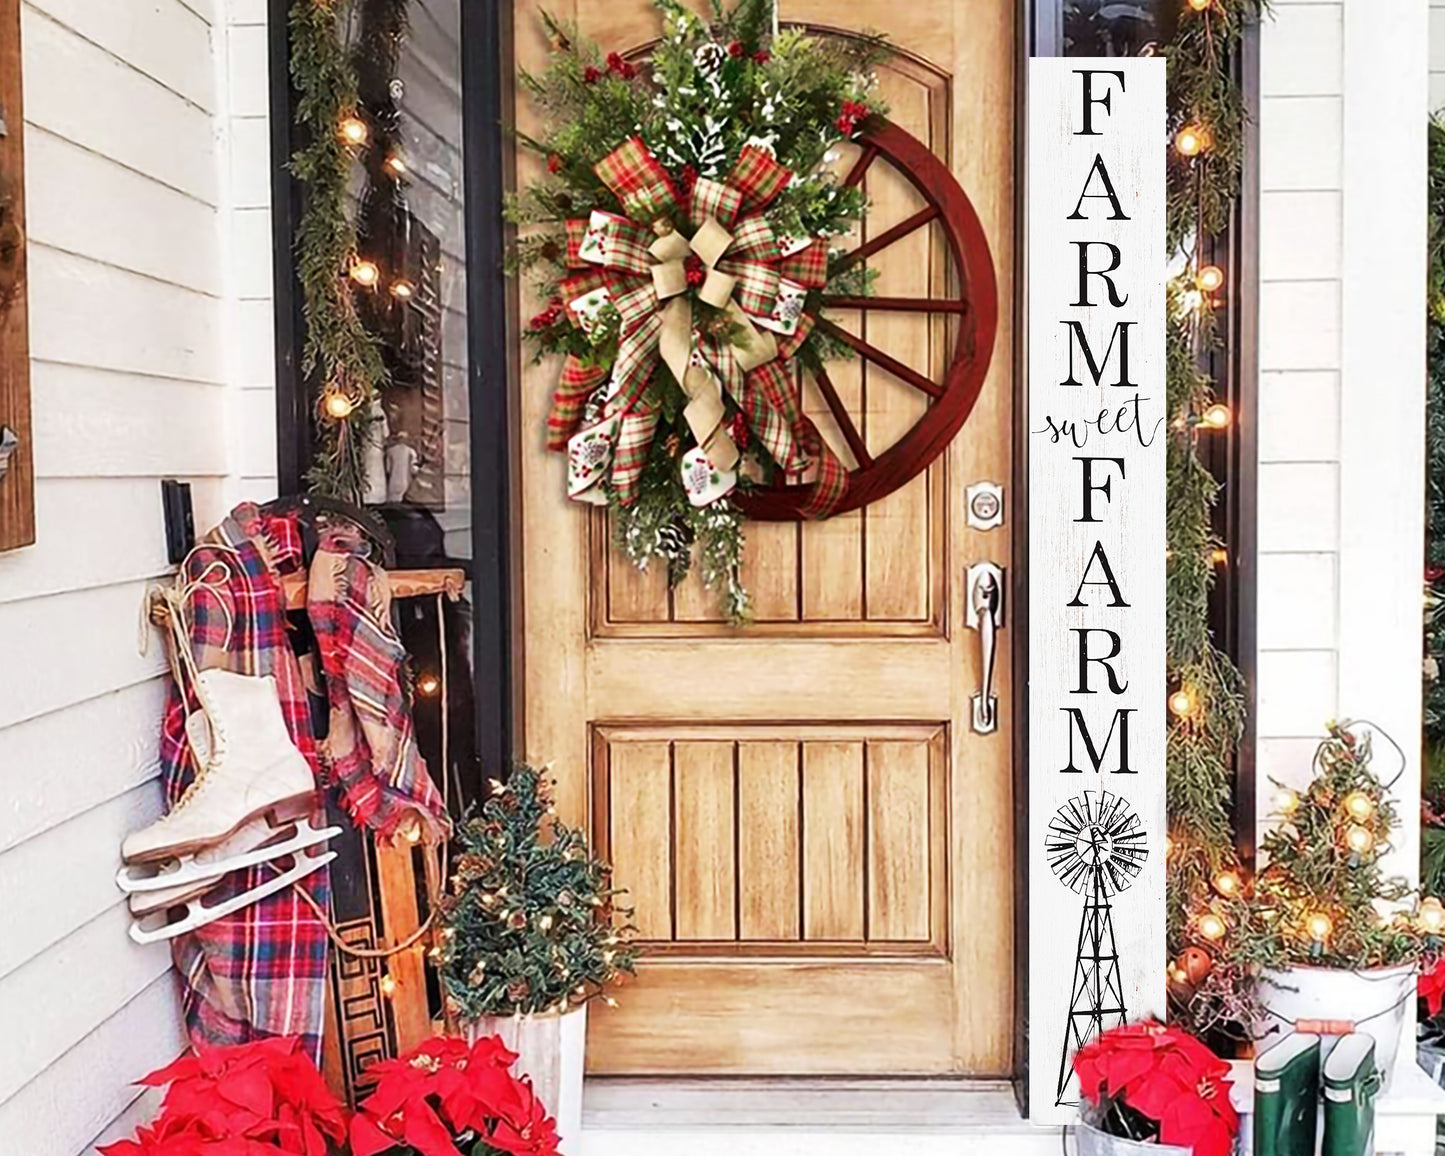 72in White 'Farm Sweet Farm' Welcome Porch Sign - Rustic Door & Outdoor Home Decor